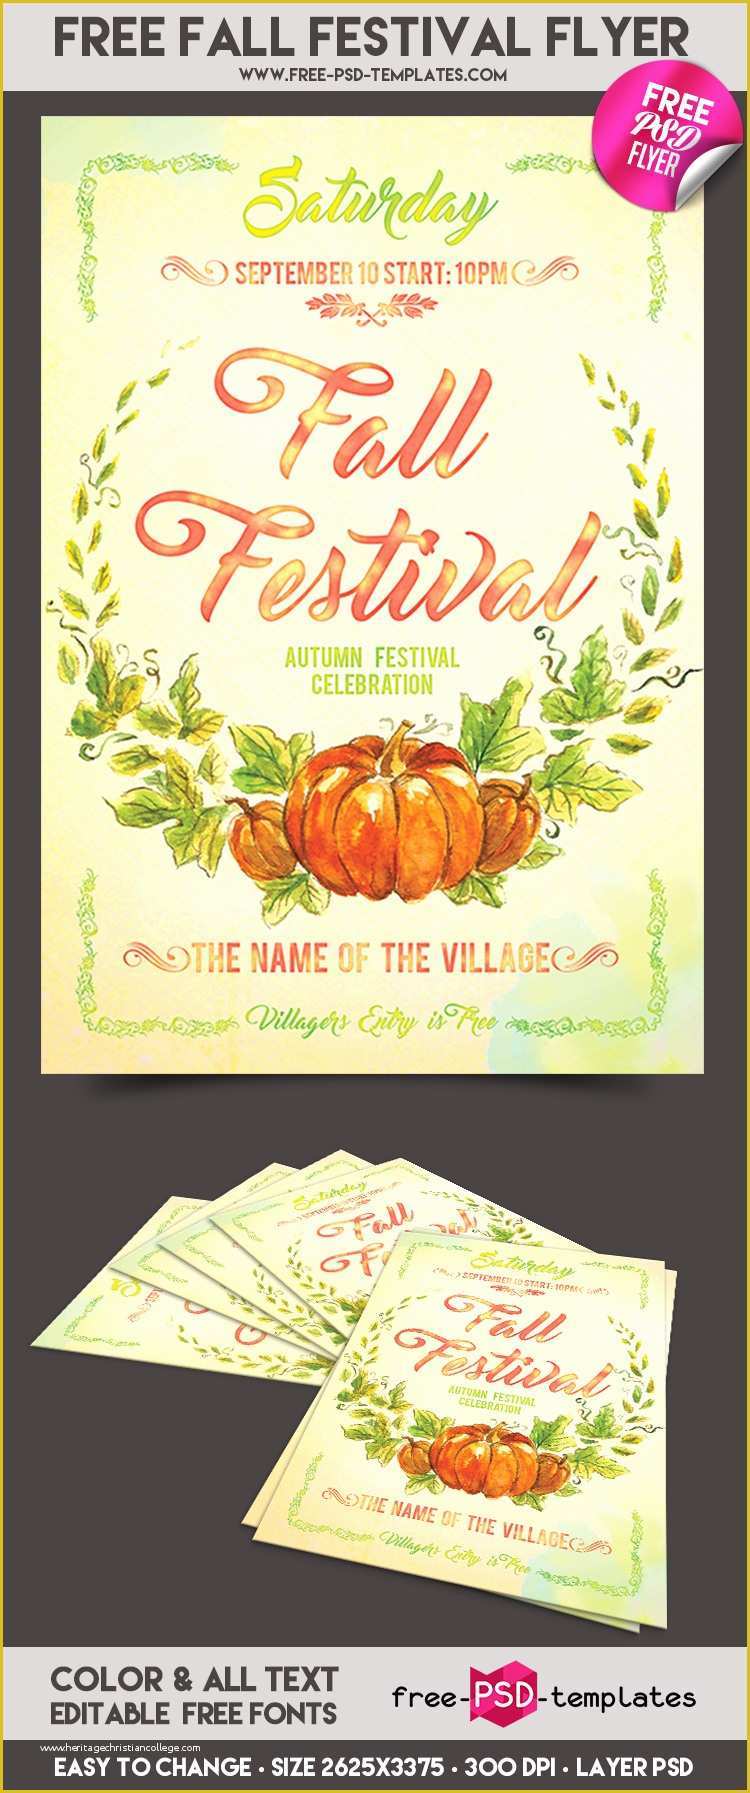 Fall Festival Flyer Template Free Of Free Fall Festival Flyer In Psd